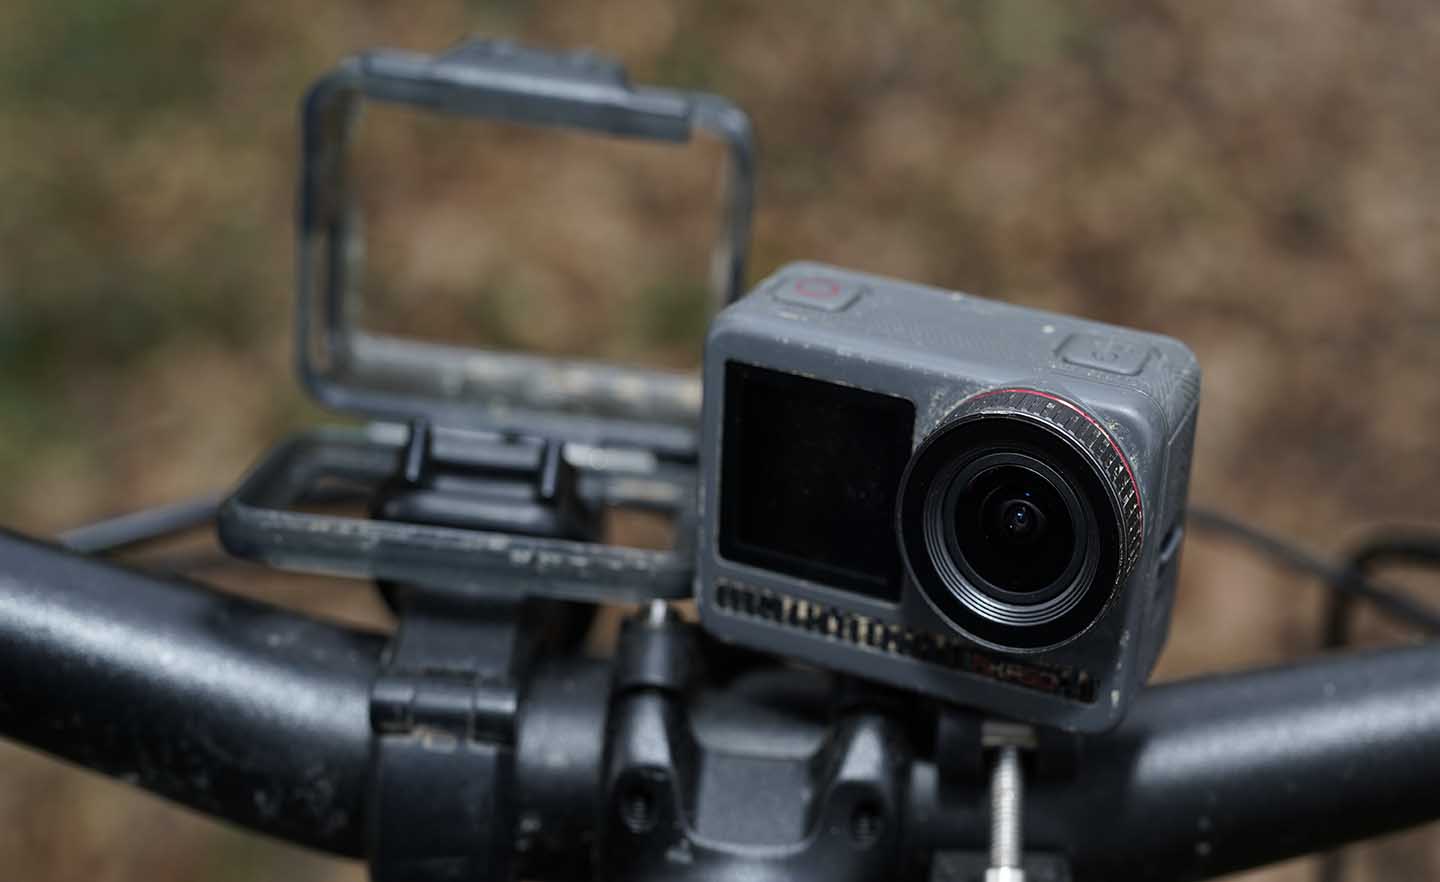 AKASO Brave 8 action camera review - great specs but some flaws